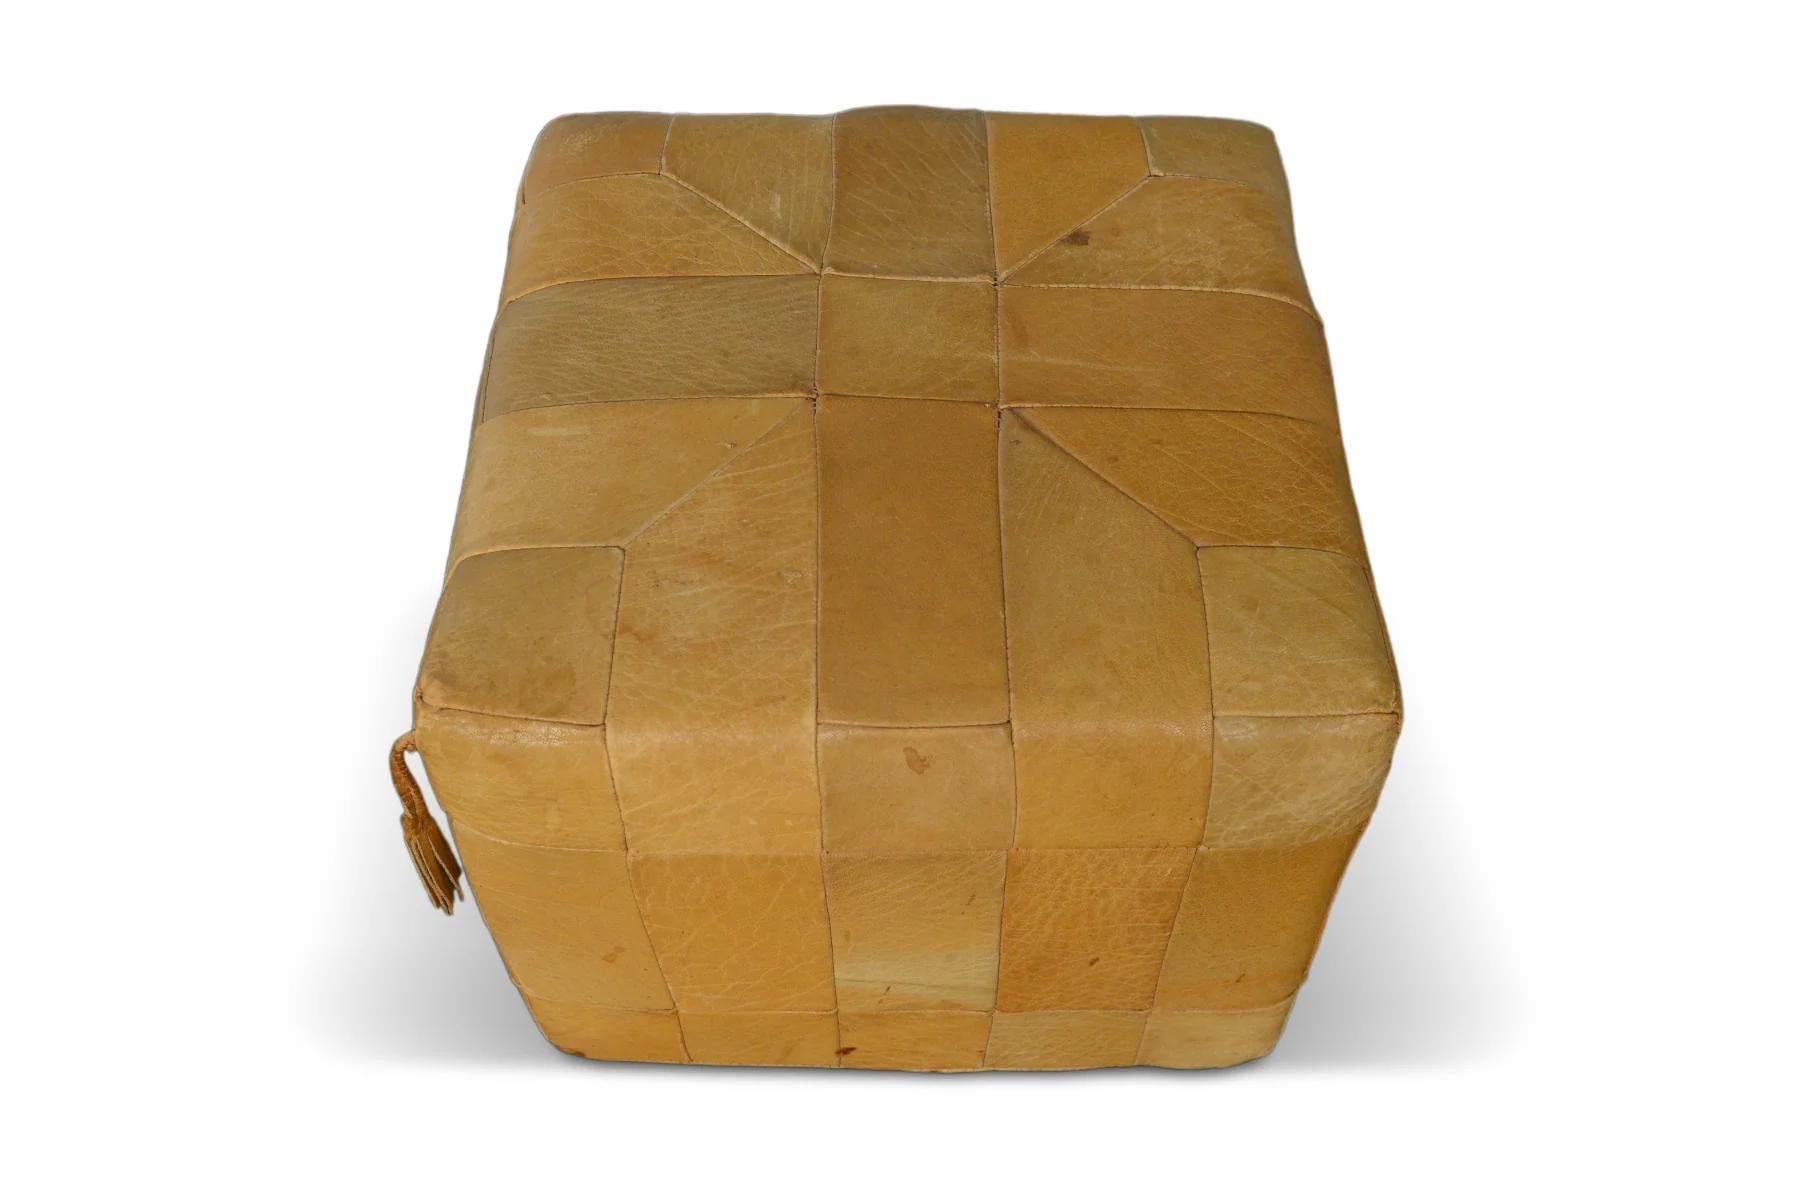 Danish Leather Patchwork Pouff / Ottoman In Good Condition For Sale In Berkeley, CA